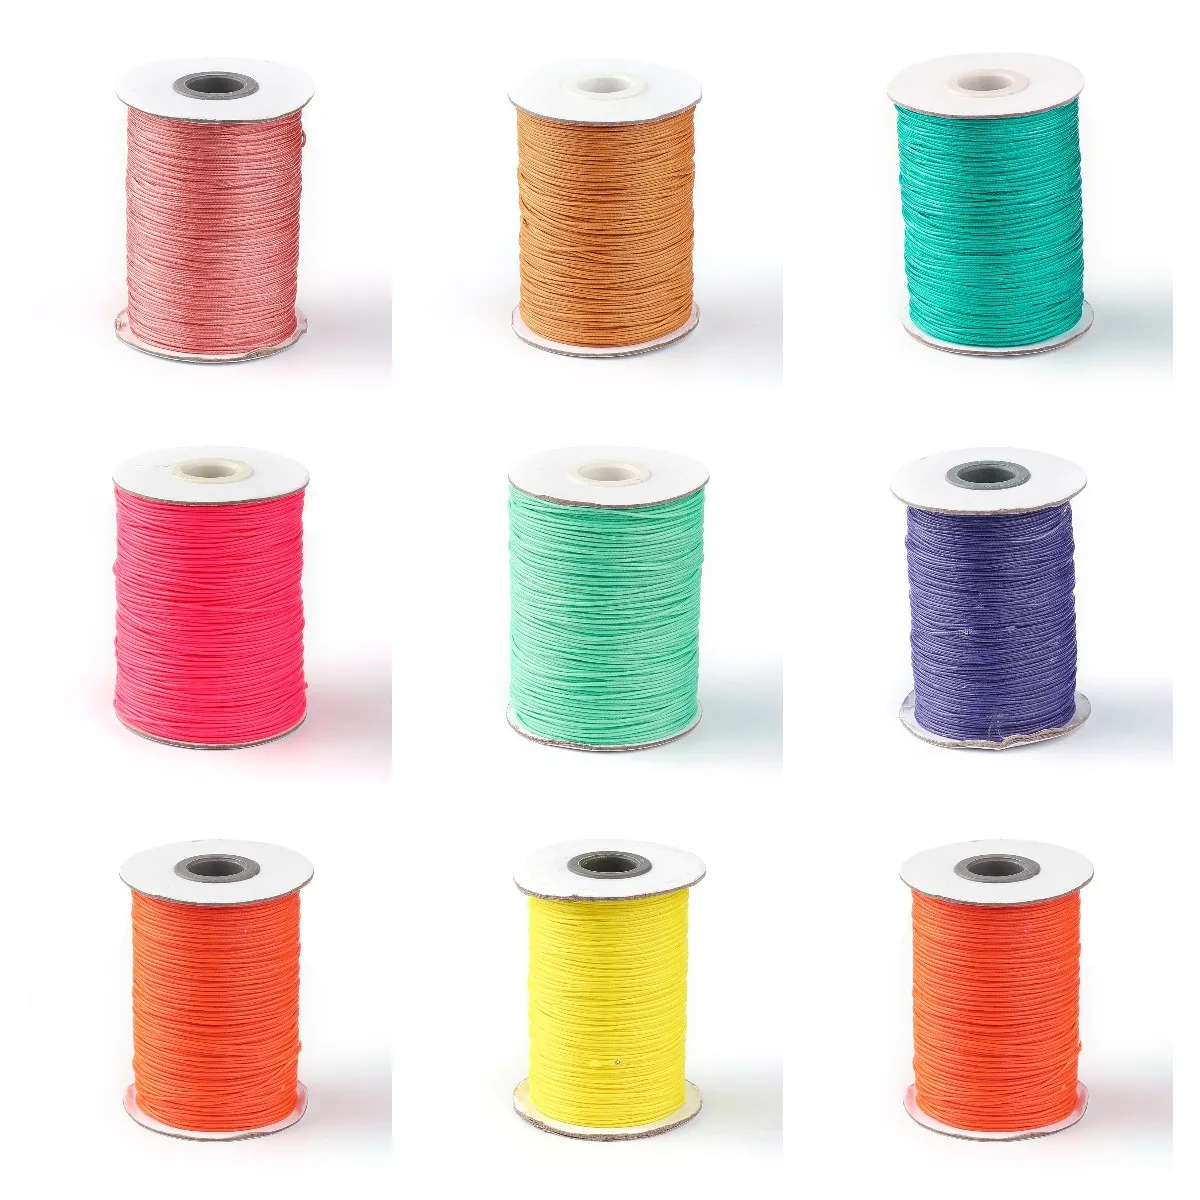 

85Yards/Roll 1MM Korean Waxed Polyester Cord Waxed Thread Cord String Strap For Necklace Bracelet Rope Bead DIY Jewelry Making